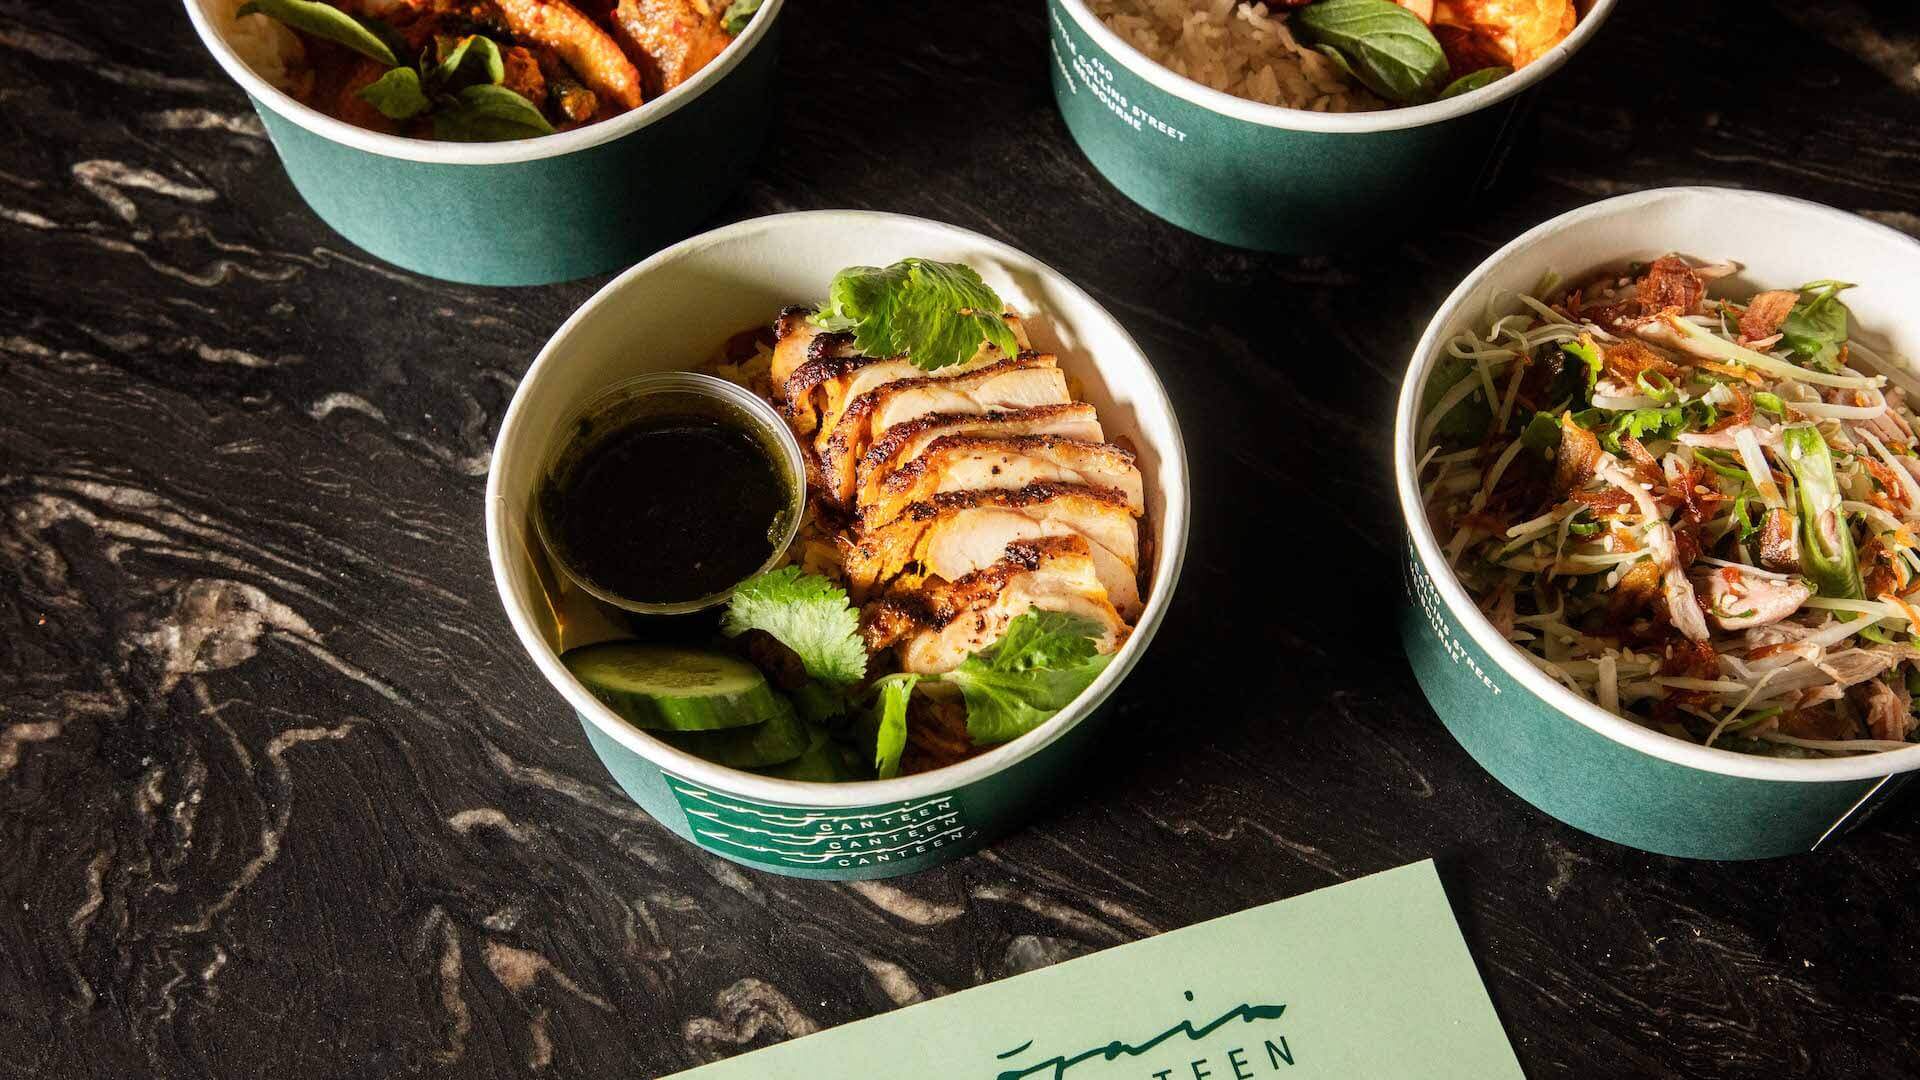 Coming Soon: Thai Dining Institution Longrain Is Opening a Pop-Up Lunch Spot in the CBD